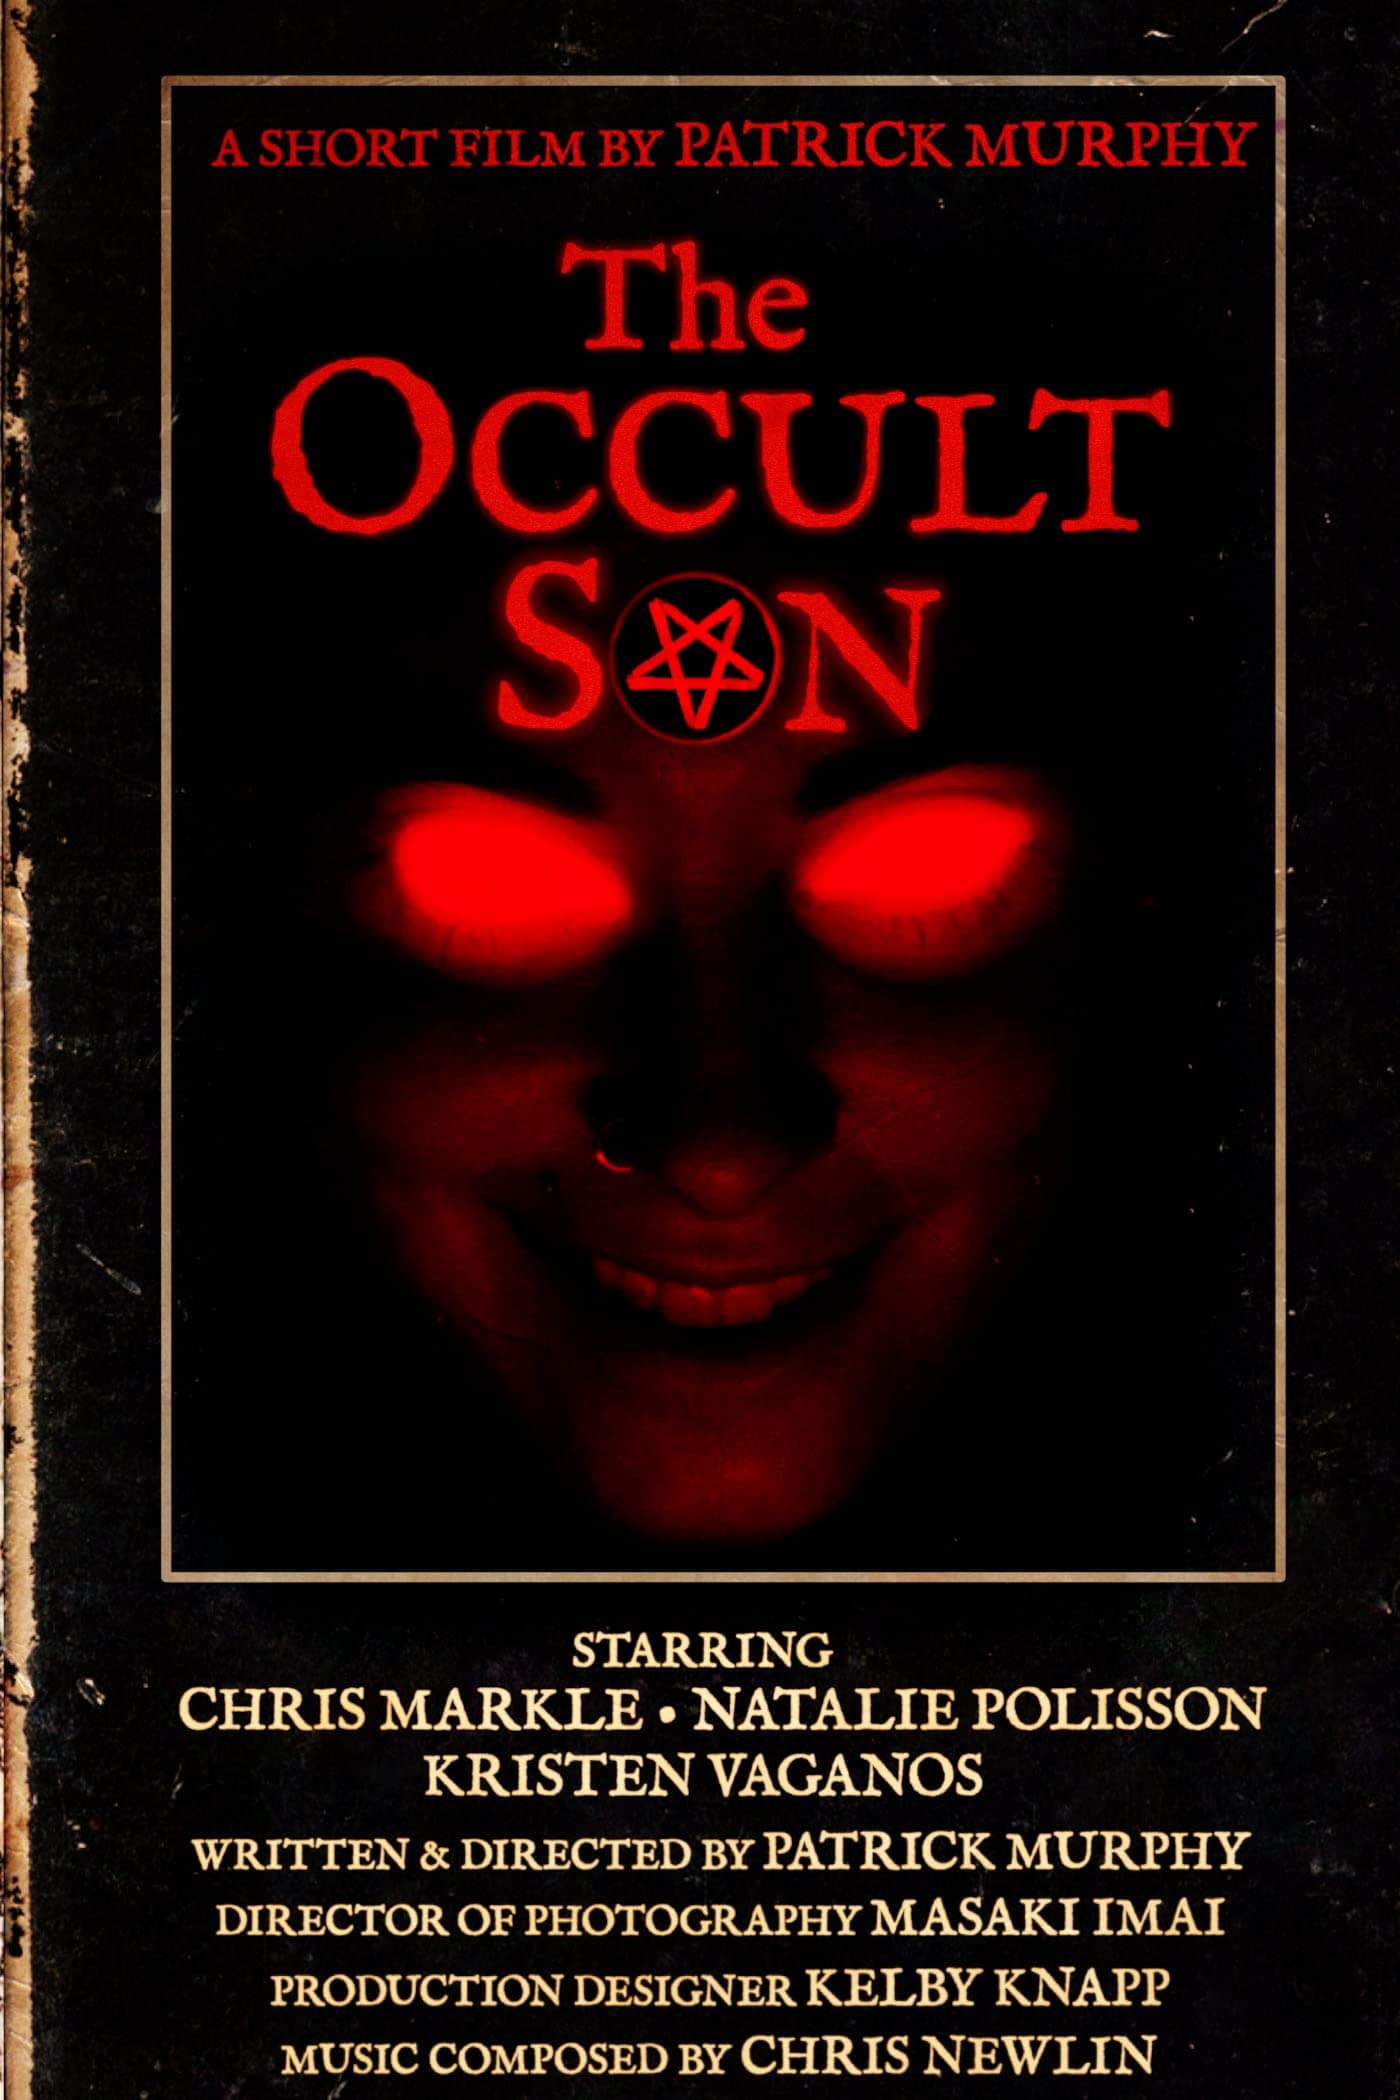 The Occult Son